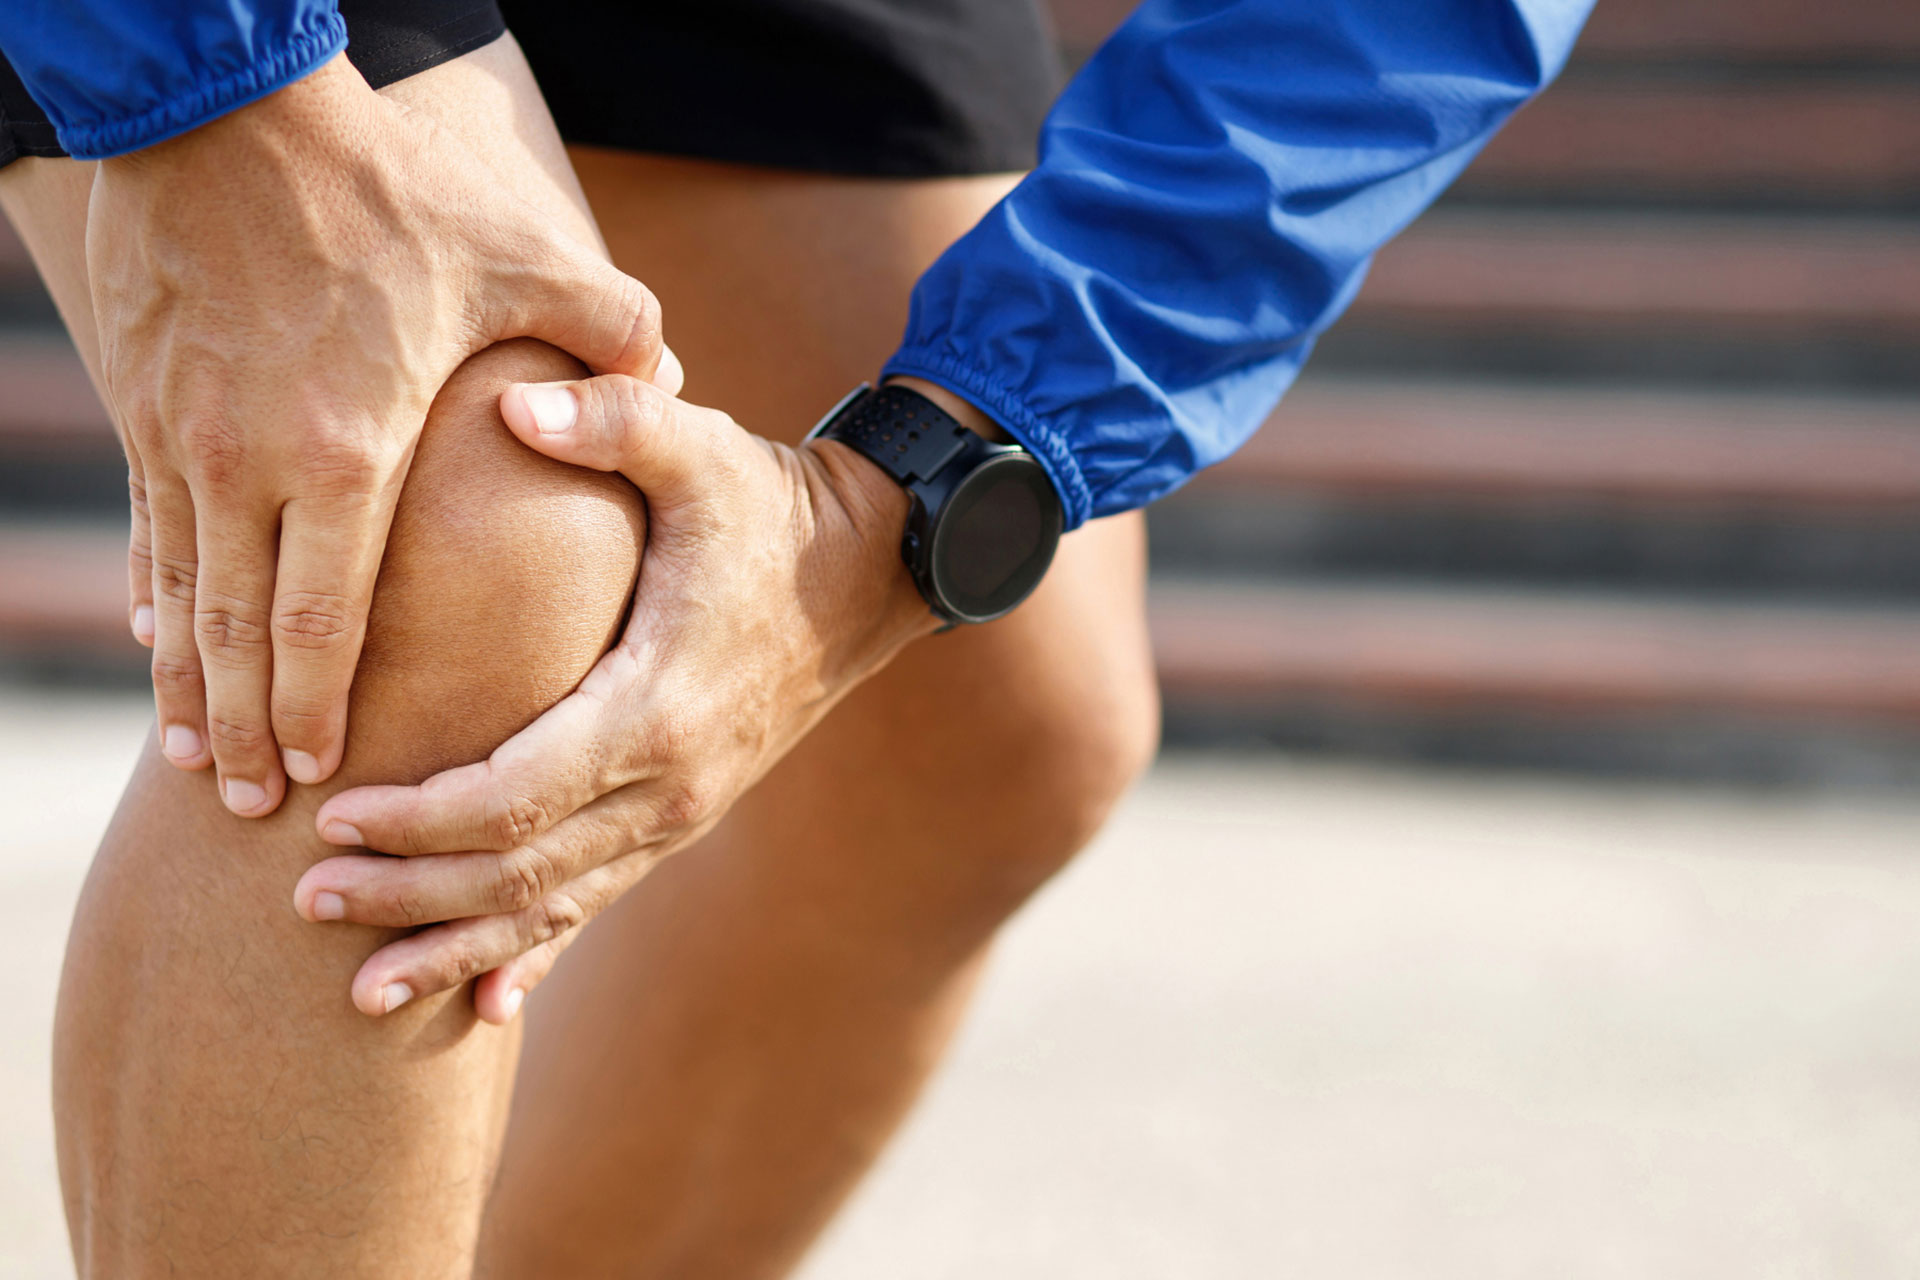 Tips on avoiding joint pain during exercise